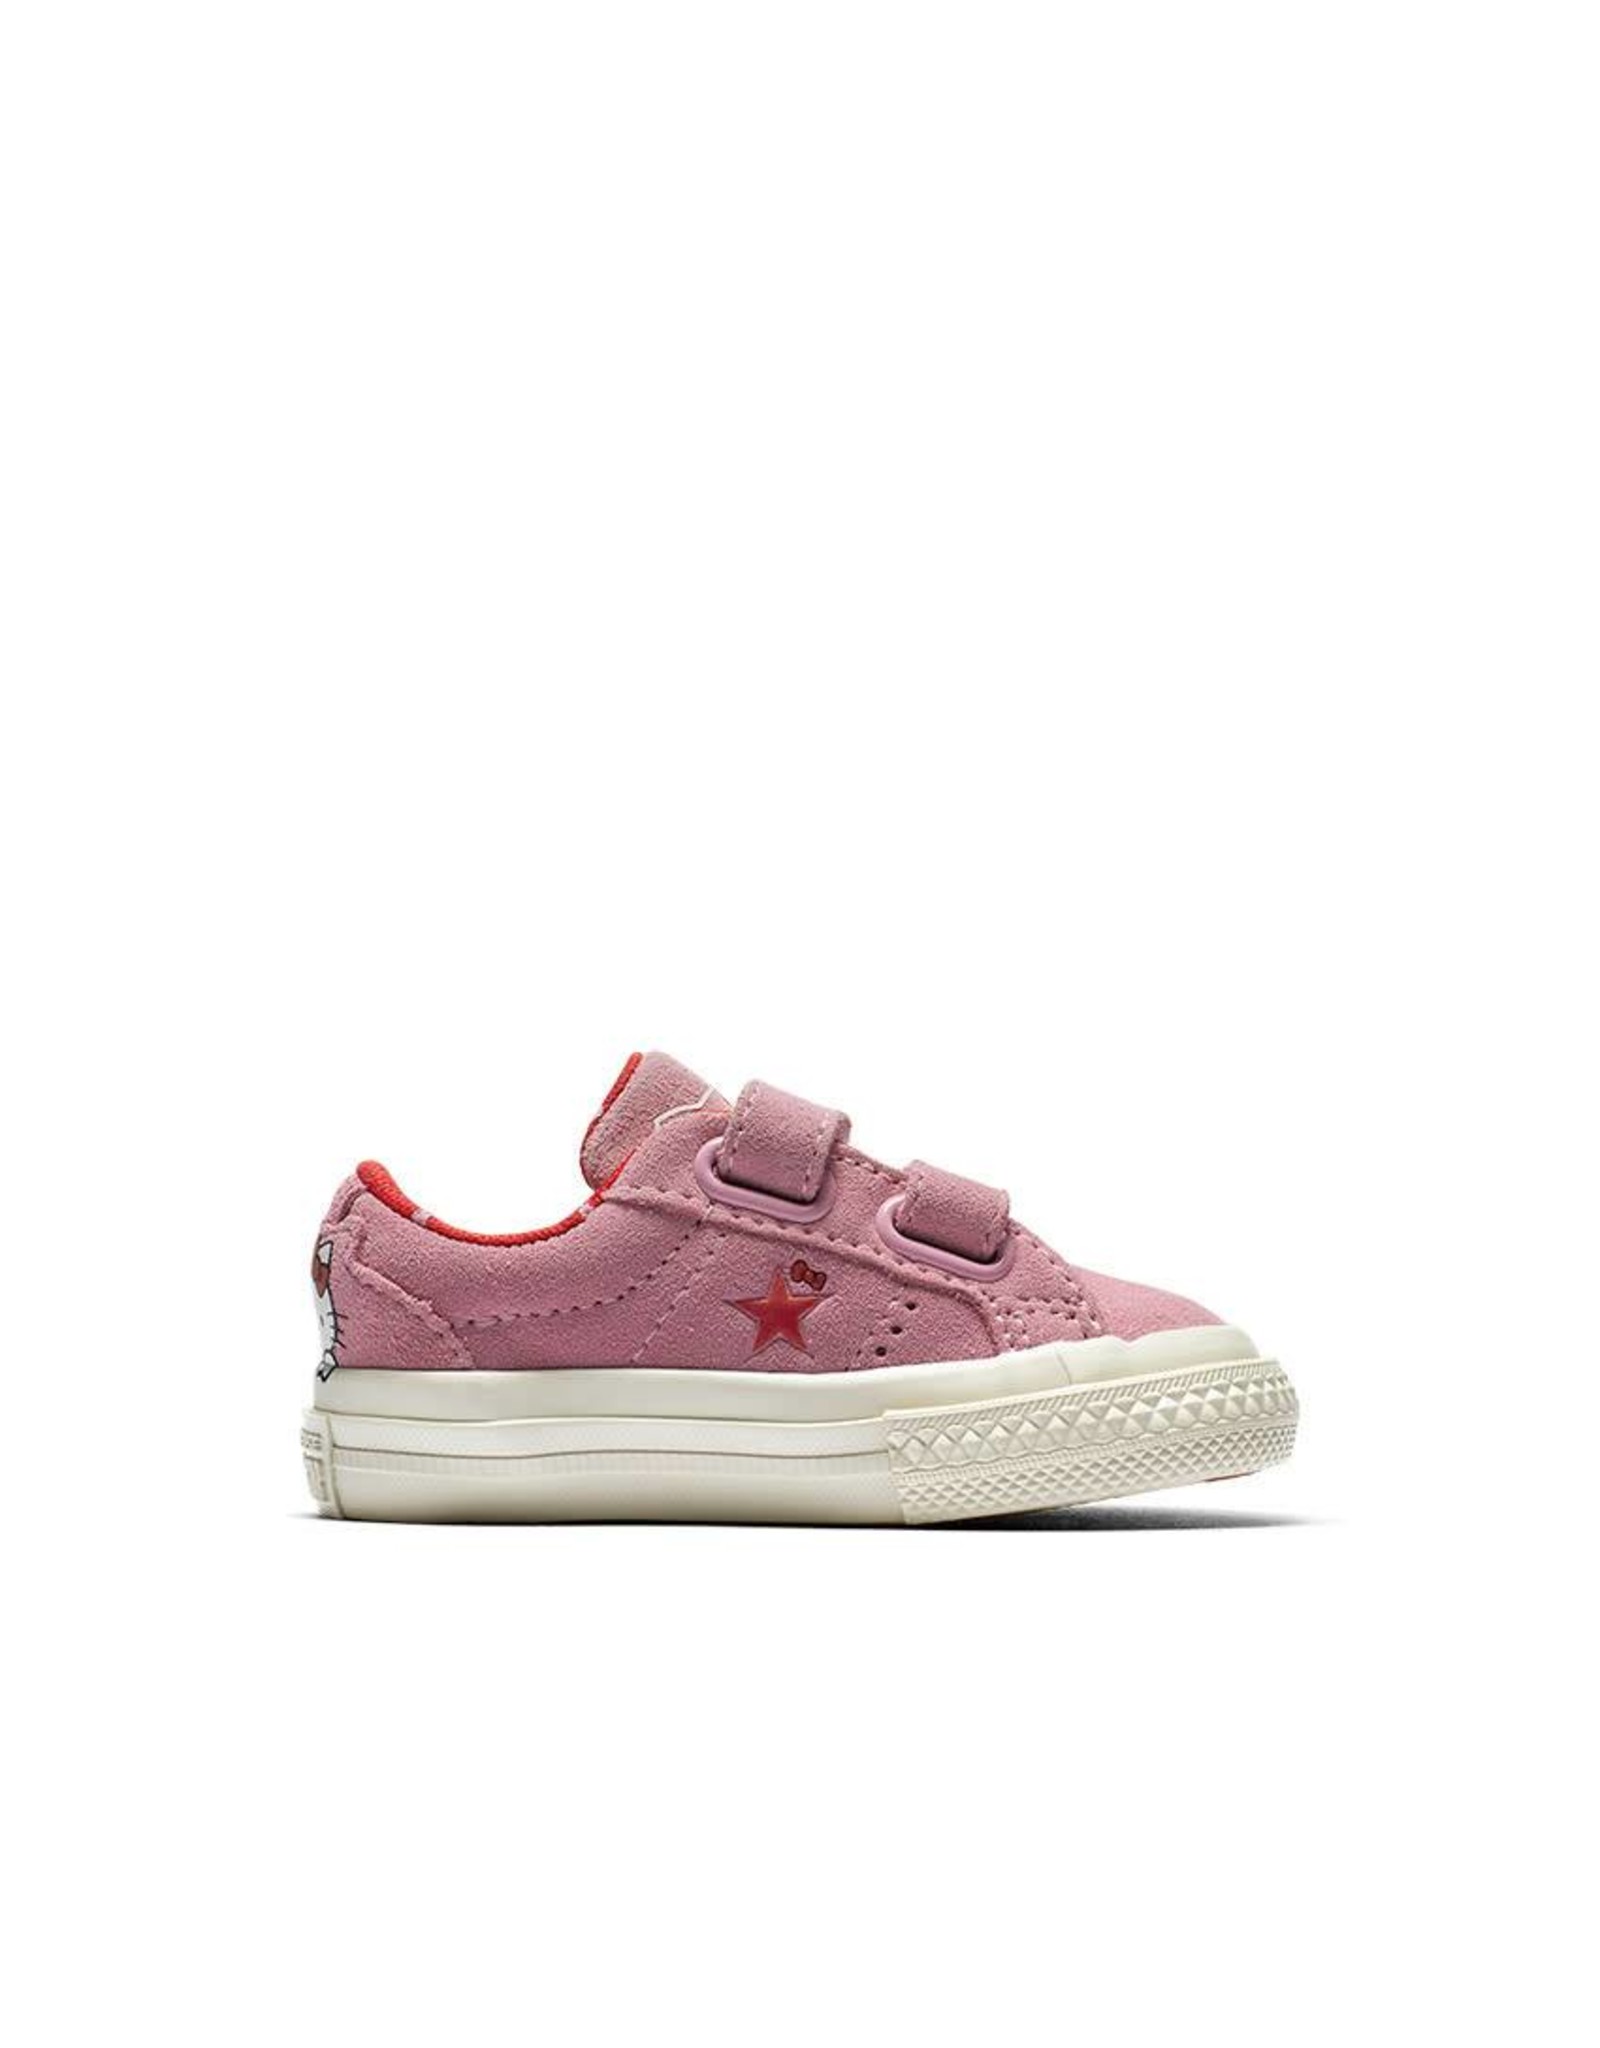 CONVERSE ONE STAR 2V HELLO KITTY OX PRISM PINK/FIERY RED HELLO KITTY CRVPI-762943C